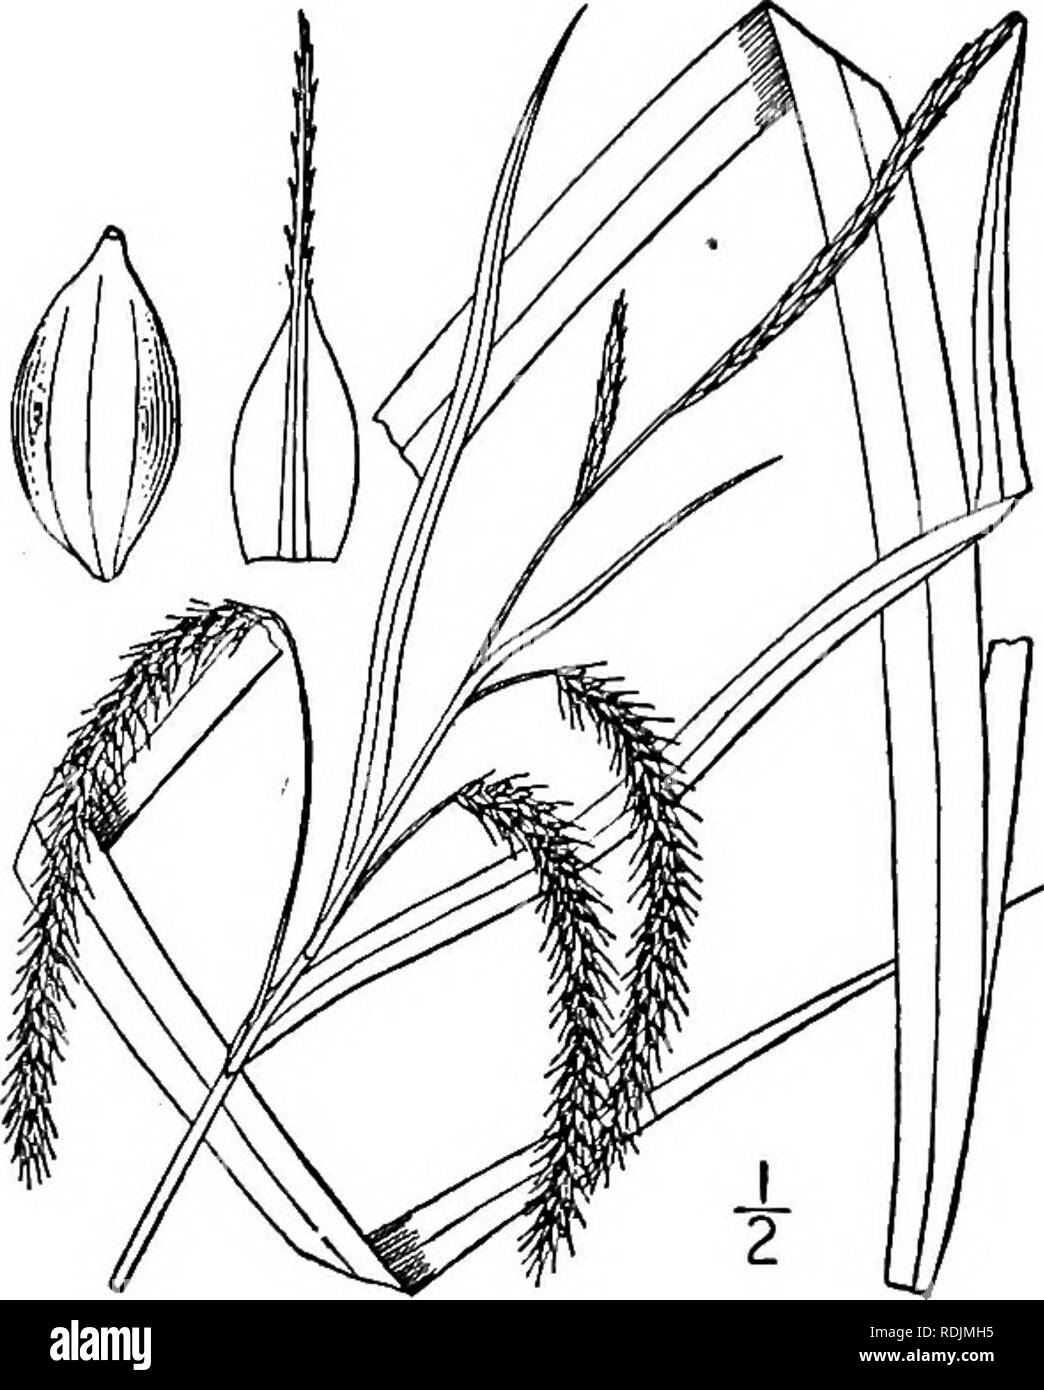 . An illustrated flora of the northern United States, Canada and the British possessions, from Newfoundland to the parallel of the southern boundary of Virginia, and from the Atlantic Ocean westward to the 102d meridian. Botany; Botany. Genus 18. SEDGE FAMILY. •425 194. Carex gynandra Schwein. Nodding Sedge. Fig. 1061. Carex gynandra Schwein. Ann. Lye. N. Y. i: 70. 1824. Carex crinita var. gynandra Schwein. &amp; Torr. Ann. Lye. N Y. 1: 360. 1825. Carex Porteri Olney, Car. Bor. Am. 12. 1871. Carex crinita var. simulans Fernald, Rhodora 4: 219. 1902. Similar to the following species, culms stou Stock Photo